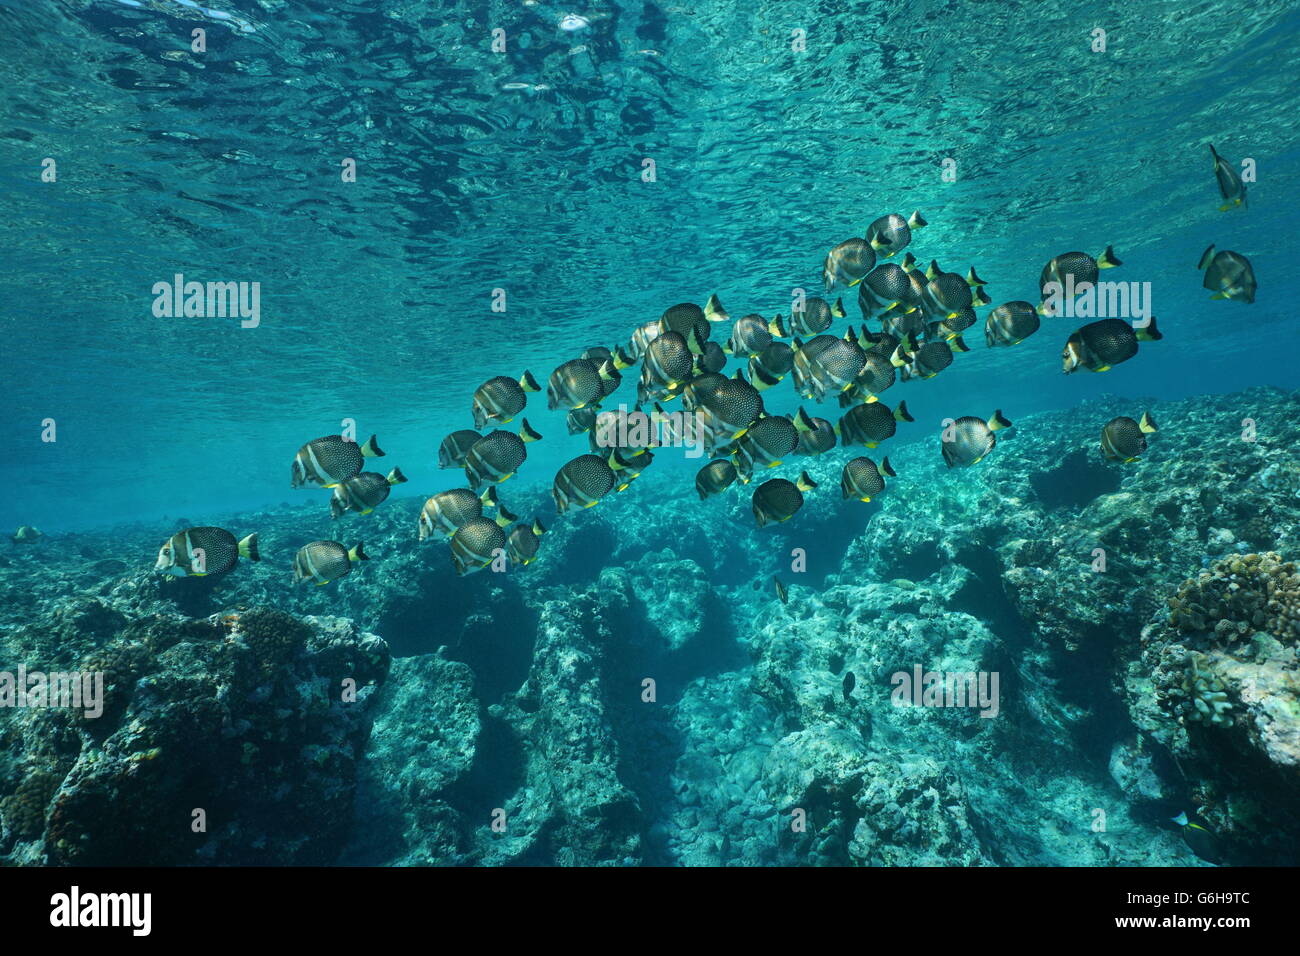 A school of fish whitespotted surgeonfish, Acanthurus guttatus, on the fore reef of Huahine, Pacific ocean, French Polynesia Stock Photo